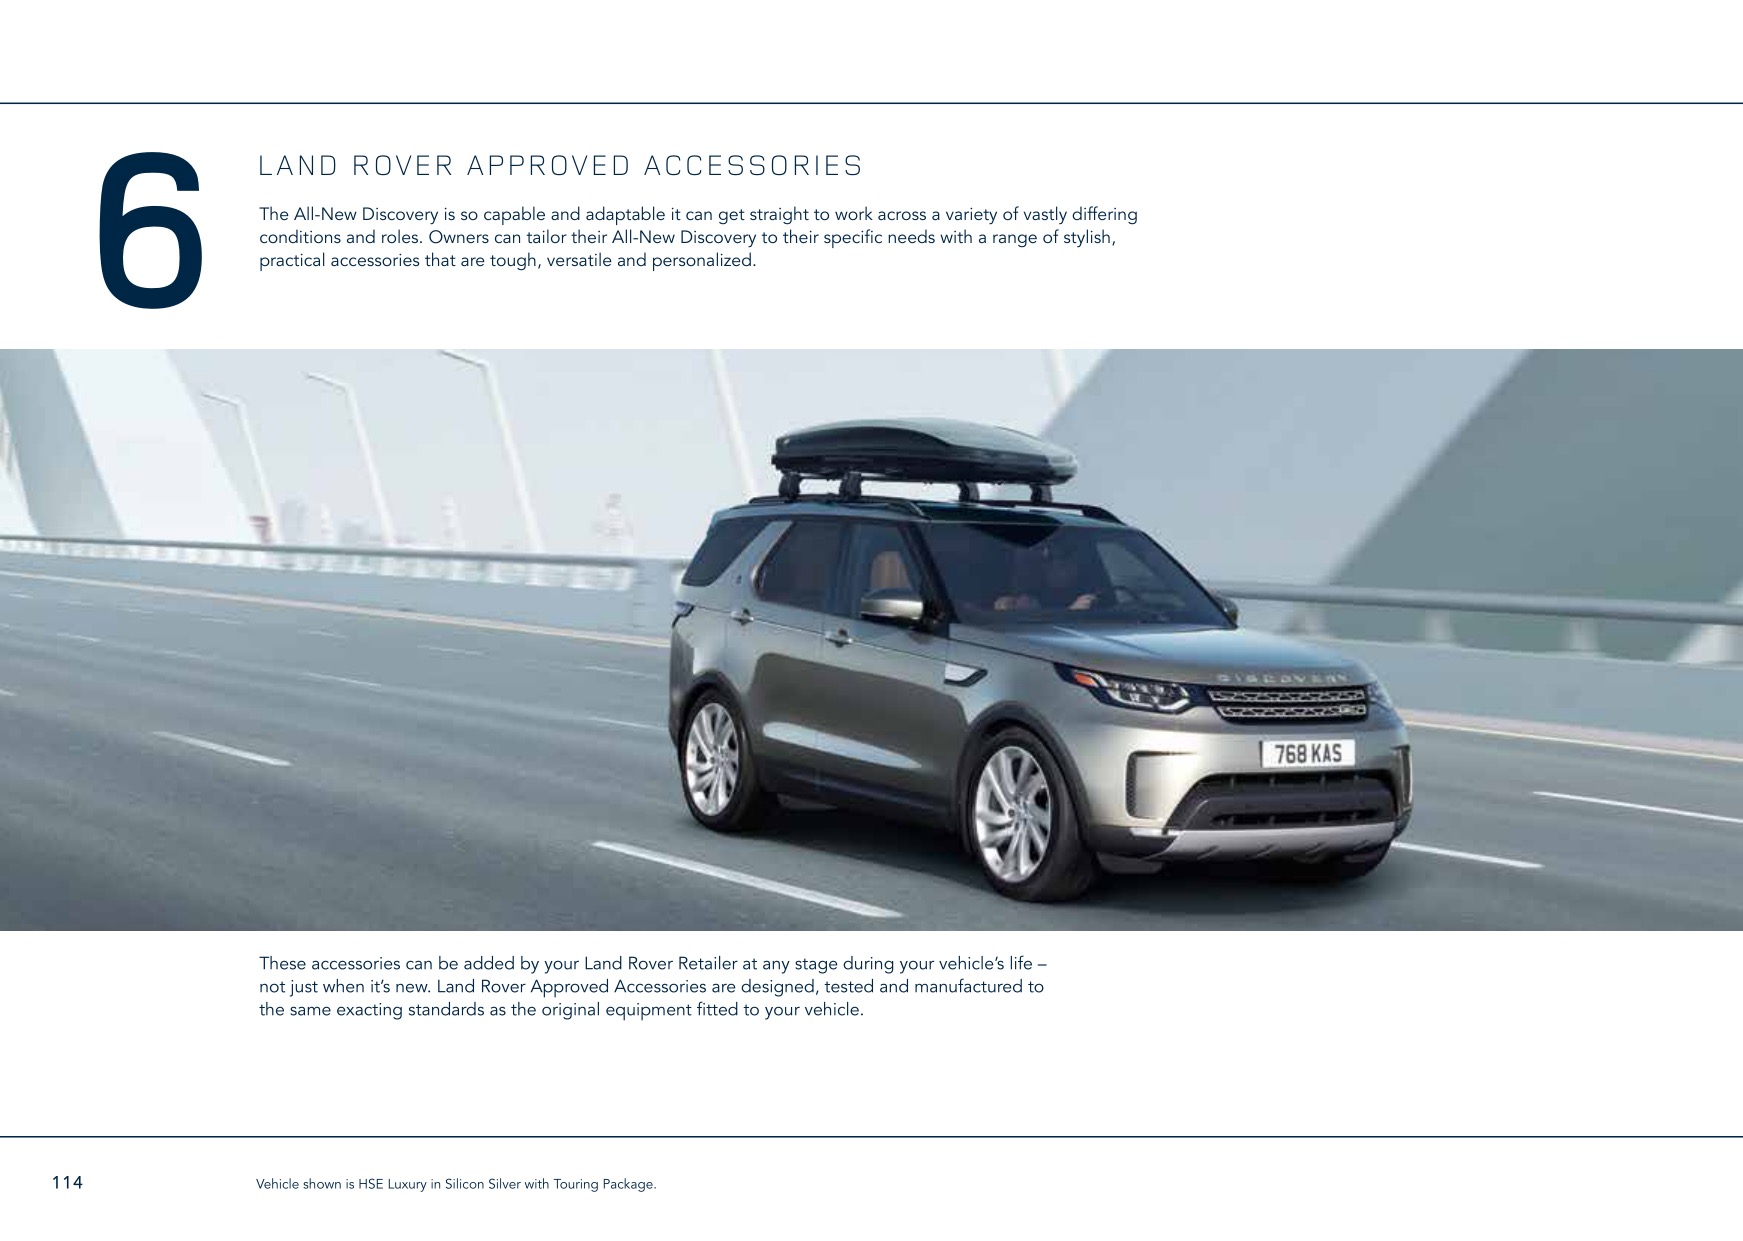 2017 Land Rover Discovery Brochure Page 3